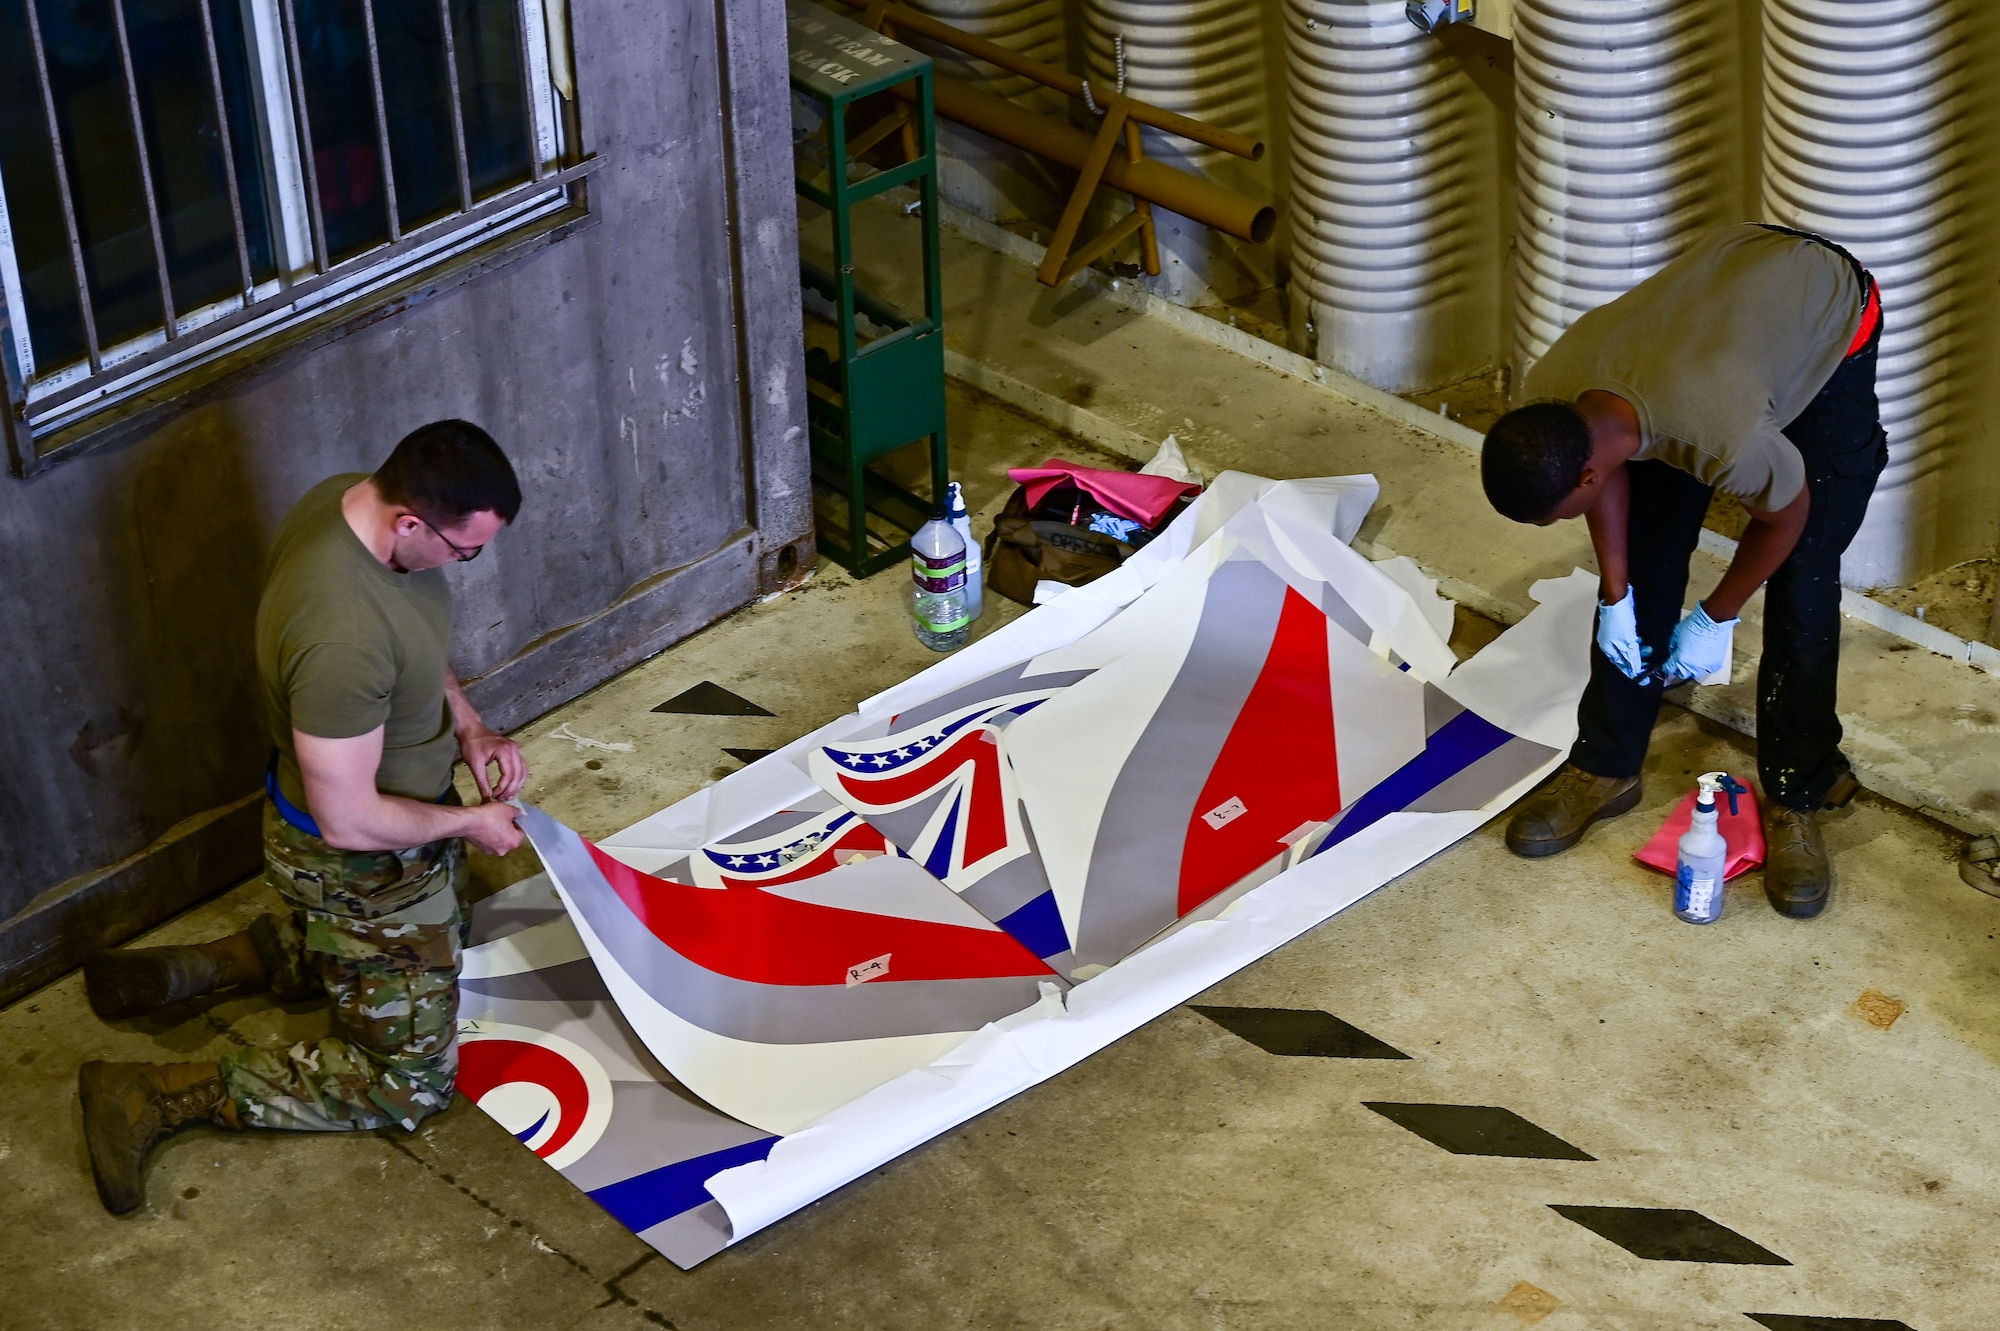 Staff Sgt. Matthew Campbell, 8th Maintenance Squadron aircraft structural maintainer craftsman, and Senior Airman Connor Young, 8th MXS aircraft structural maintenance journeyman, prepare a 70th anniversary heritage tail flash decal at Osan Air Base, Republic of Korea, May 1, 2023. The decals will be applied to U.S. Air Force and ROK Air Force assets to celebrate the two nation’s 70-year strong Alliance. (U.S. Air Force photo by Tech. Sgt. Timothy Dischinat)